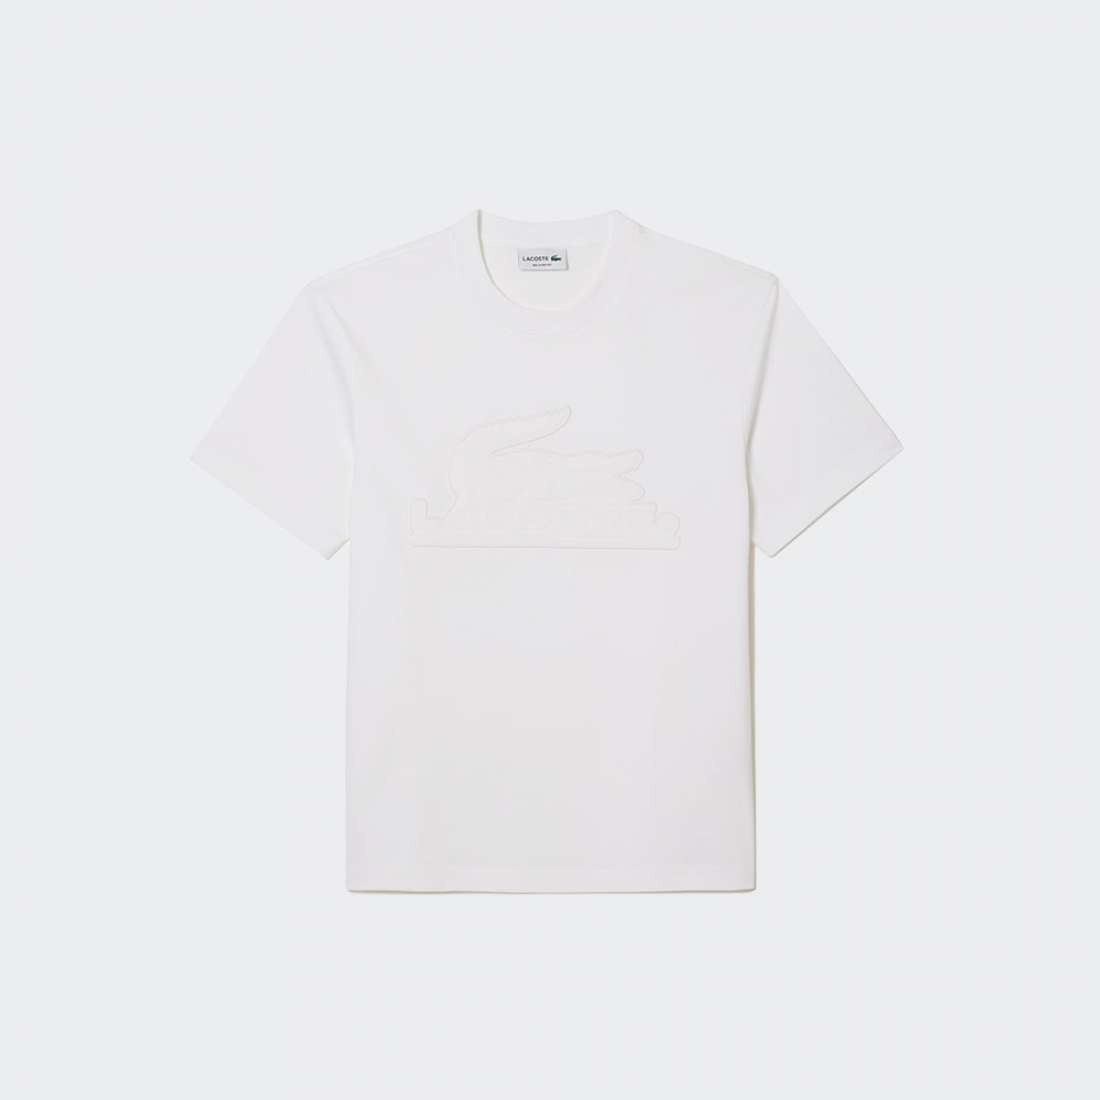 TSHIRT LACOSTE PADDED BADGE ABYSM